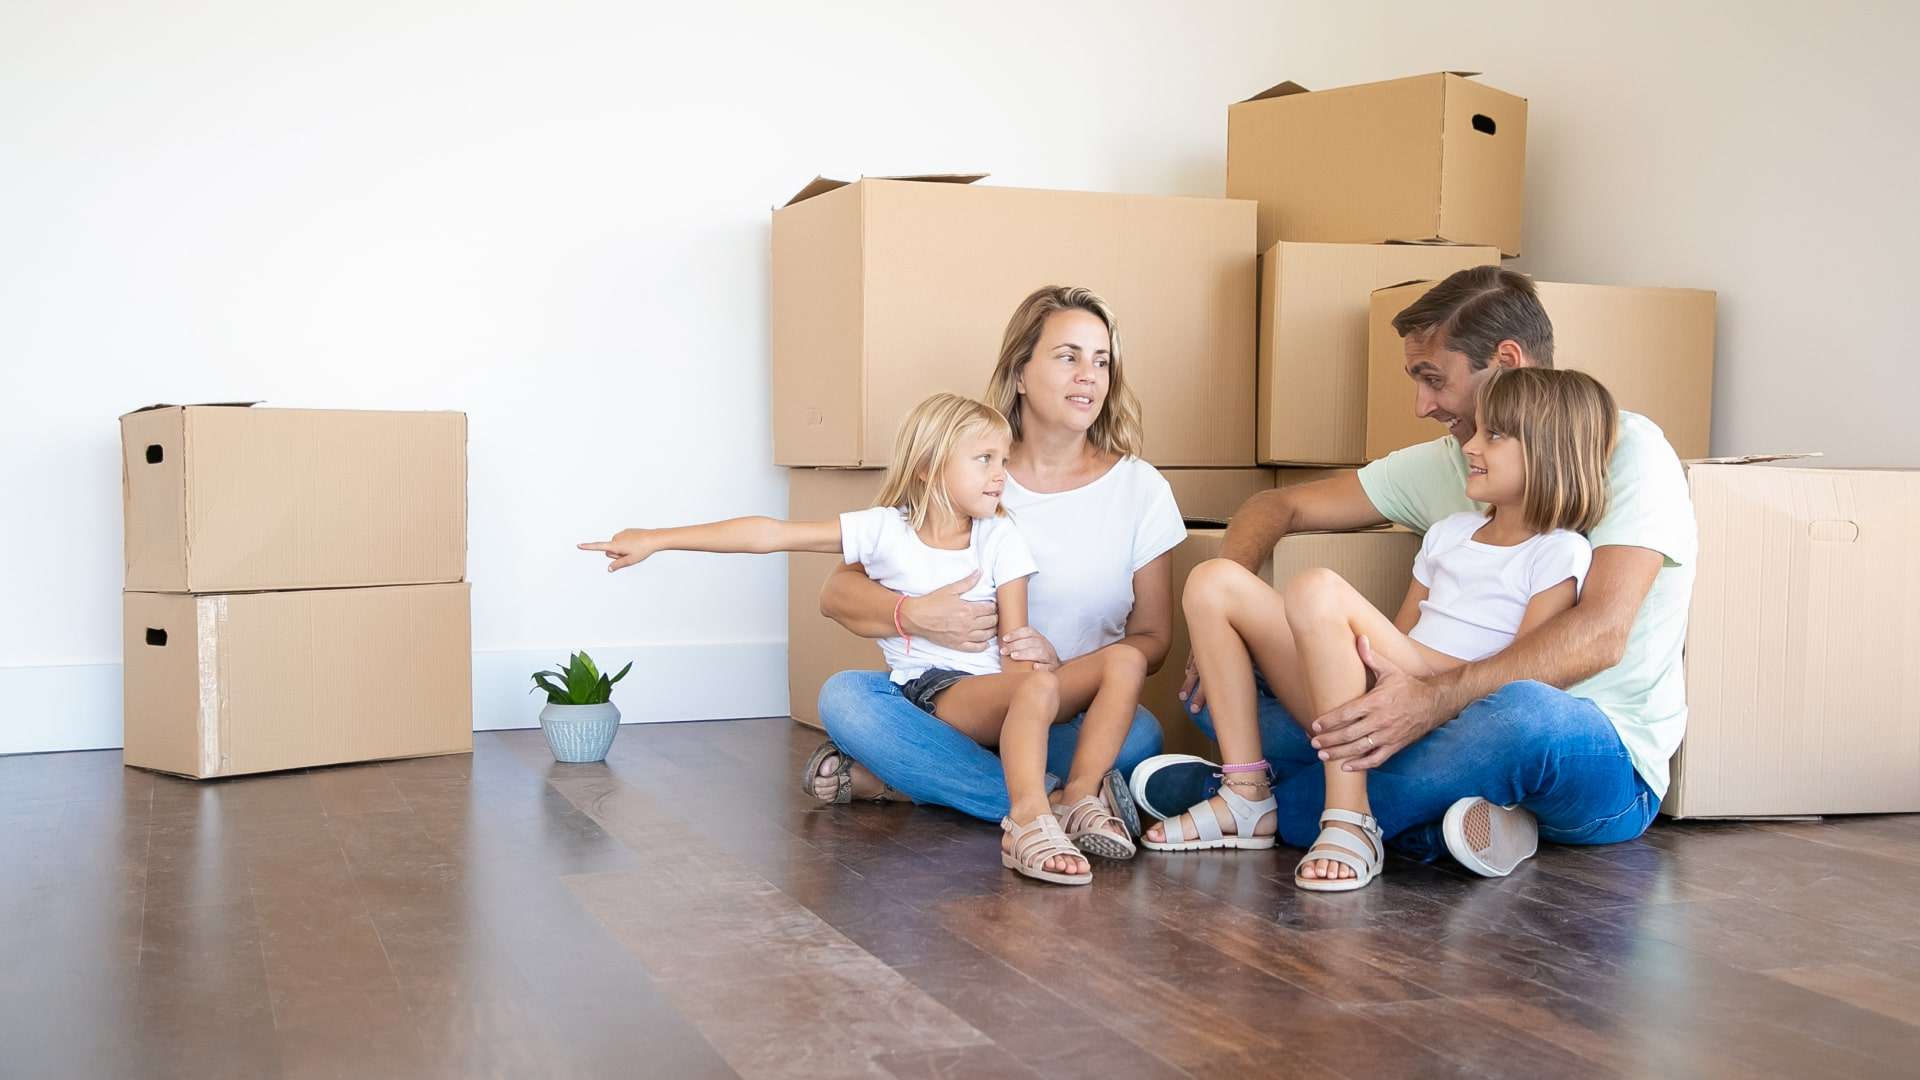 Happy family sitting on floor in new home near cardboard boxes